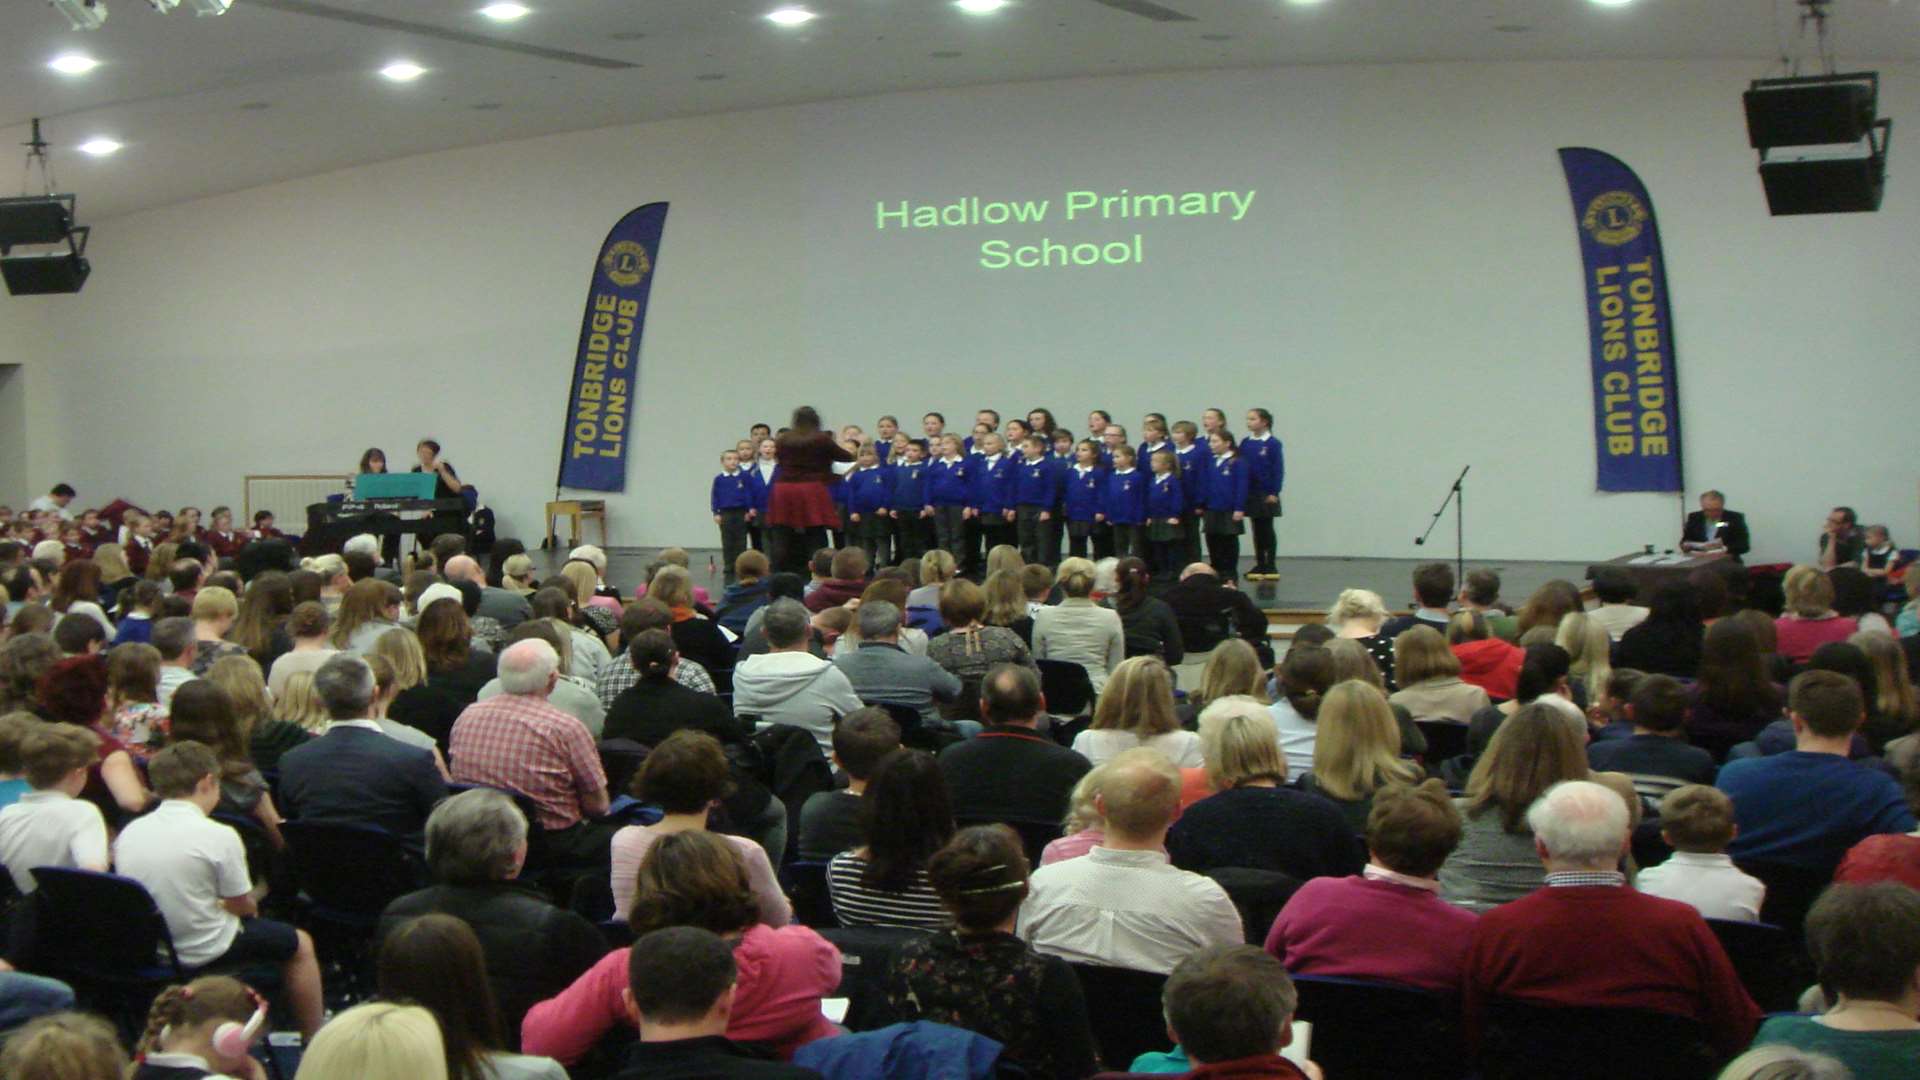 Hadlow School Choir perform in front of a packed audience.